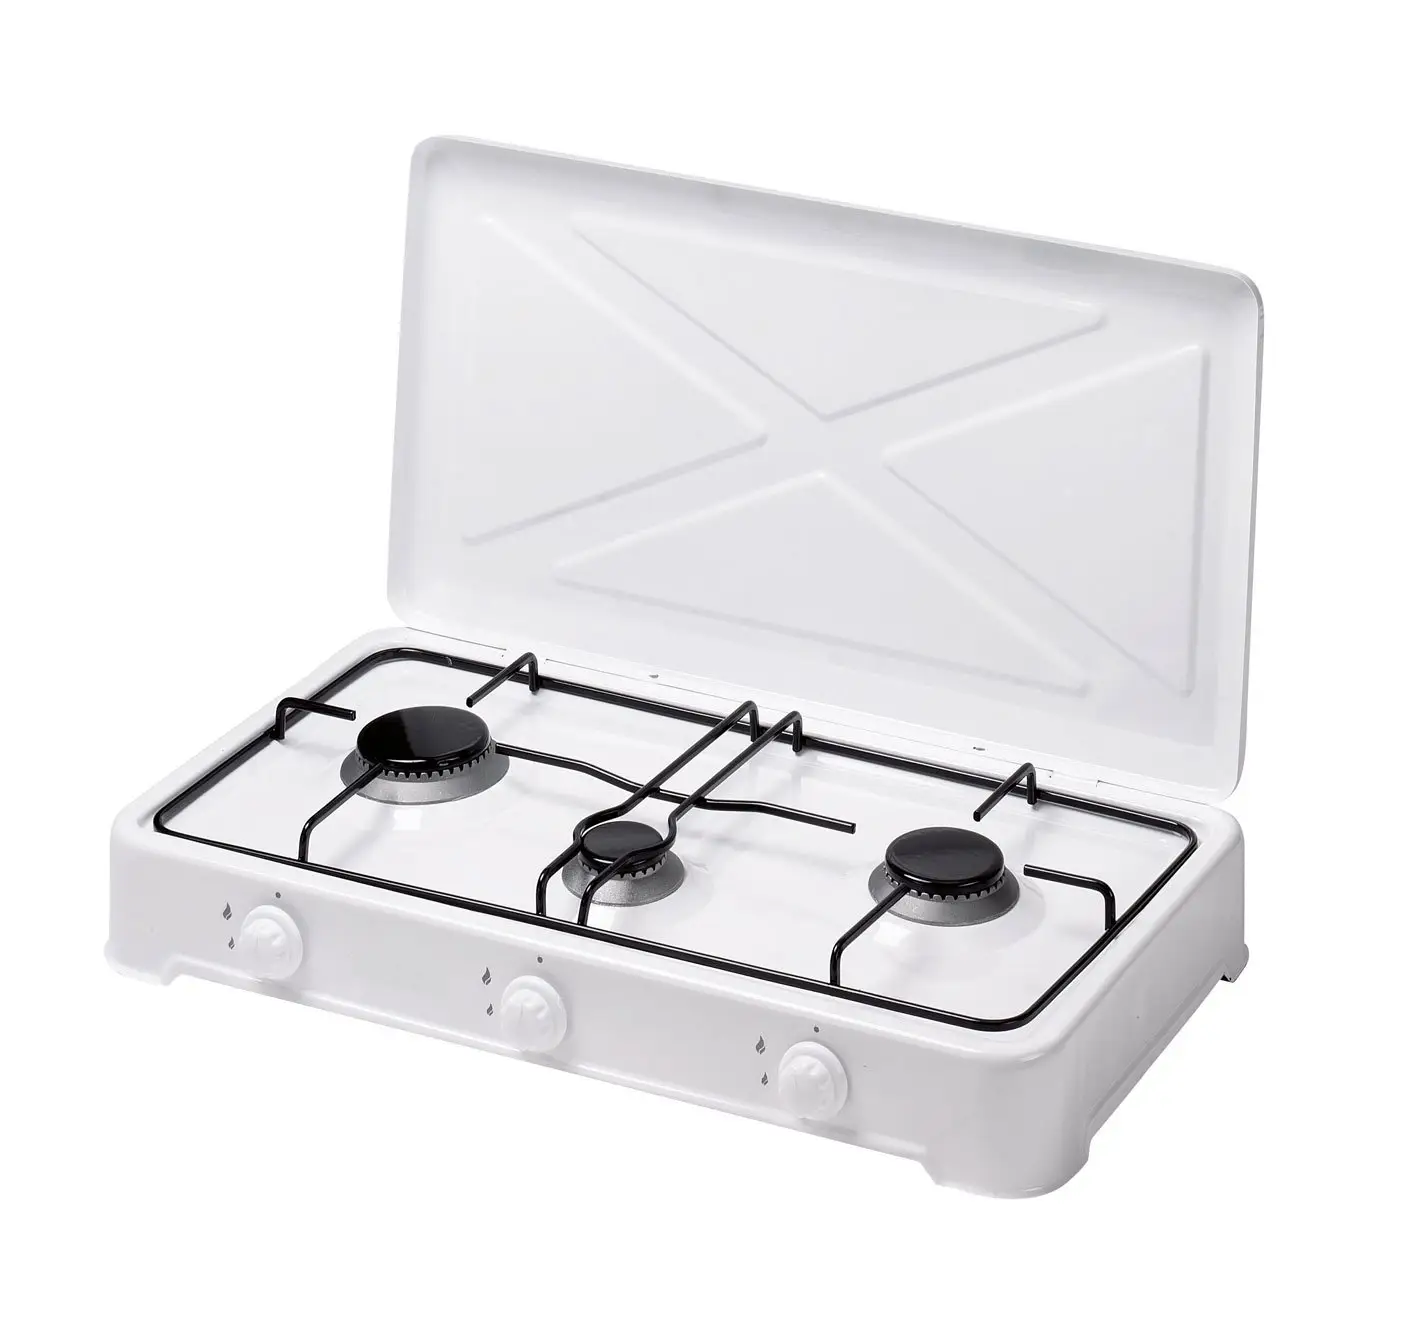 THREE BURNER TABLE TOP GAS COOKER